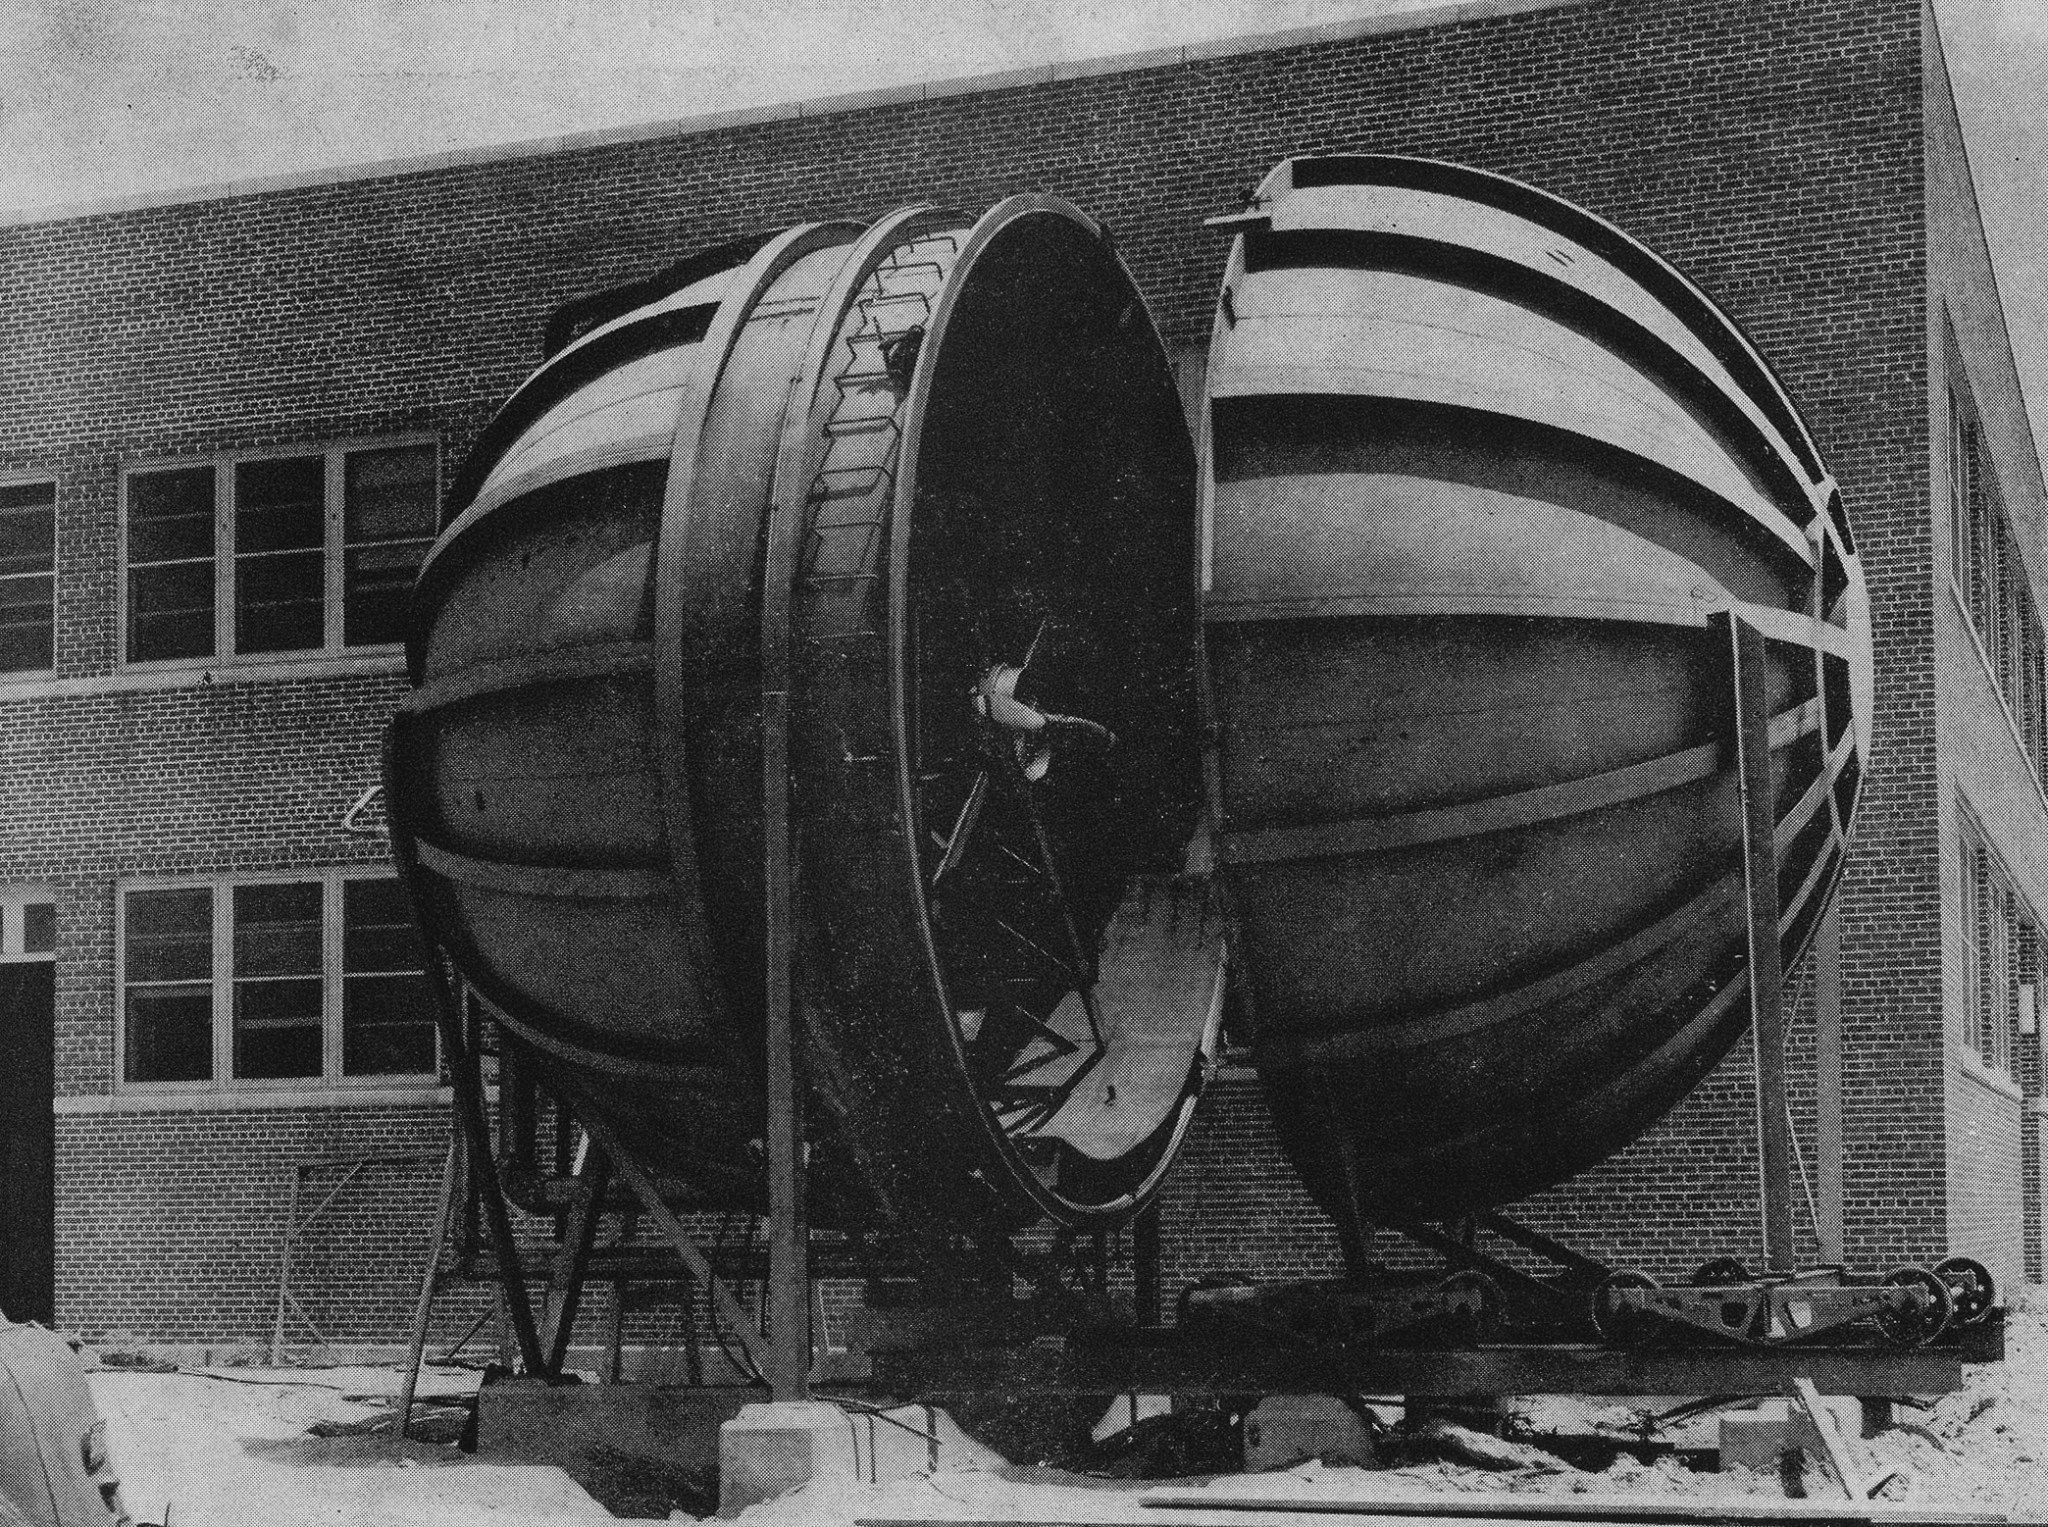 The Supersonic Sphere, located behind Building 1229, in 1940.